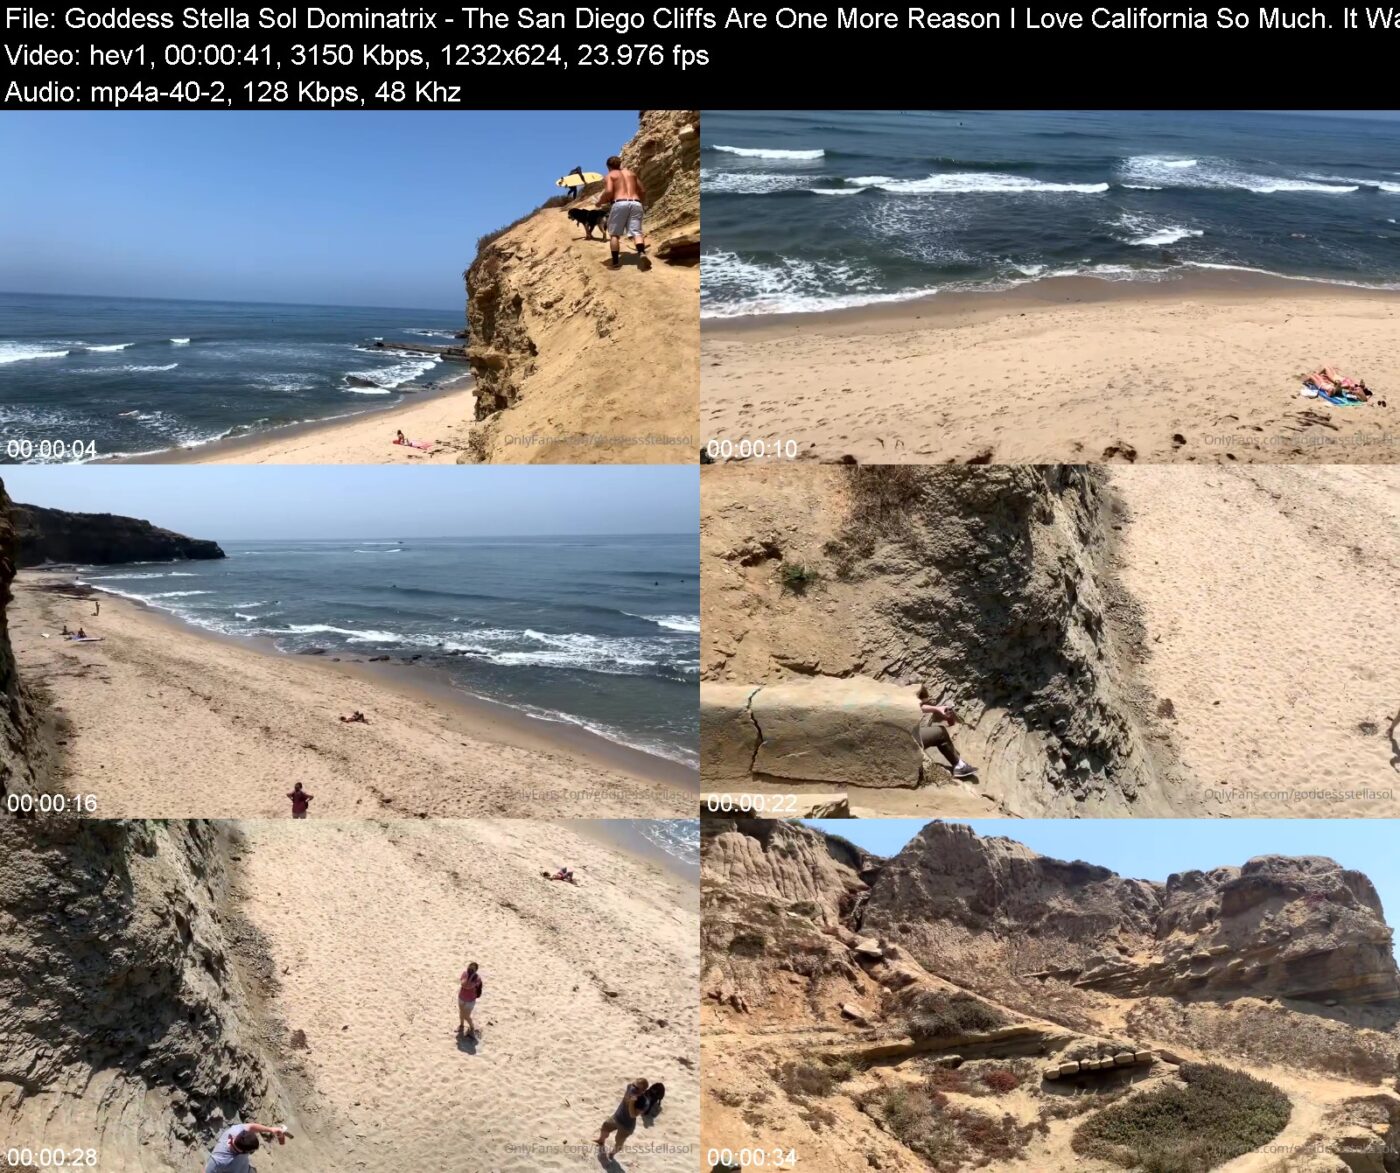 Actress: Goddess Stella Sol Dominatrix. Title and Studio: The San Diego Cliffs Are One More Reason I Love California So Much. It Was A Mostly Perfect Day – 5724